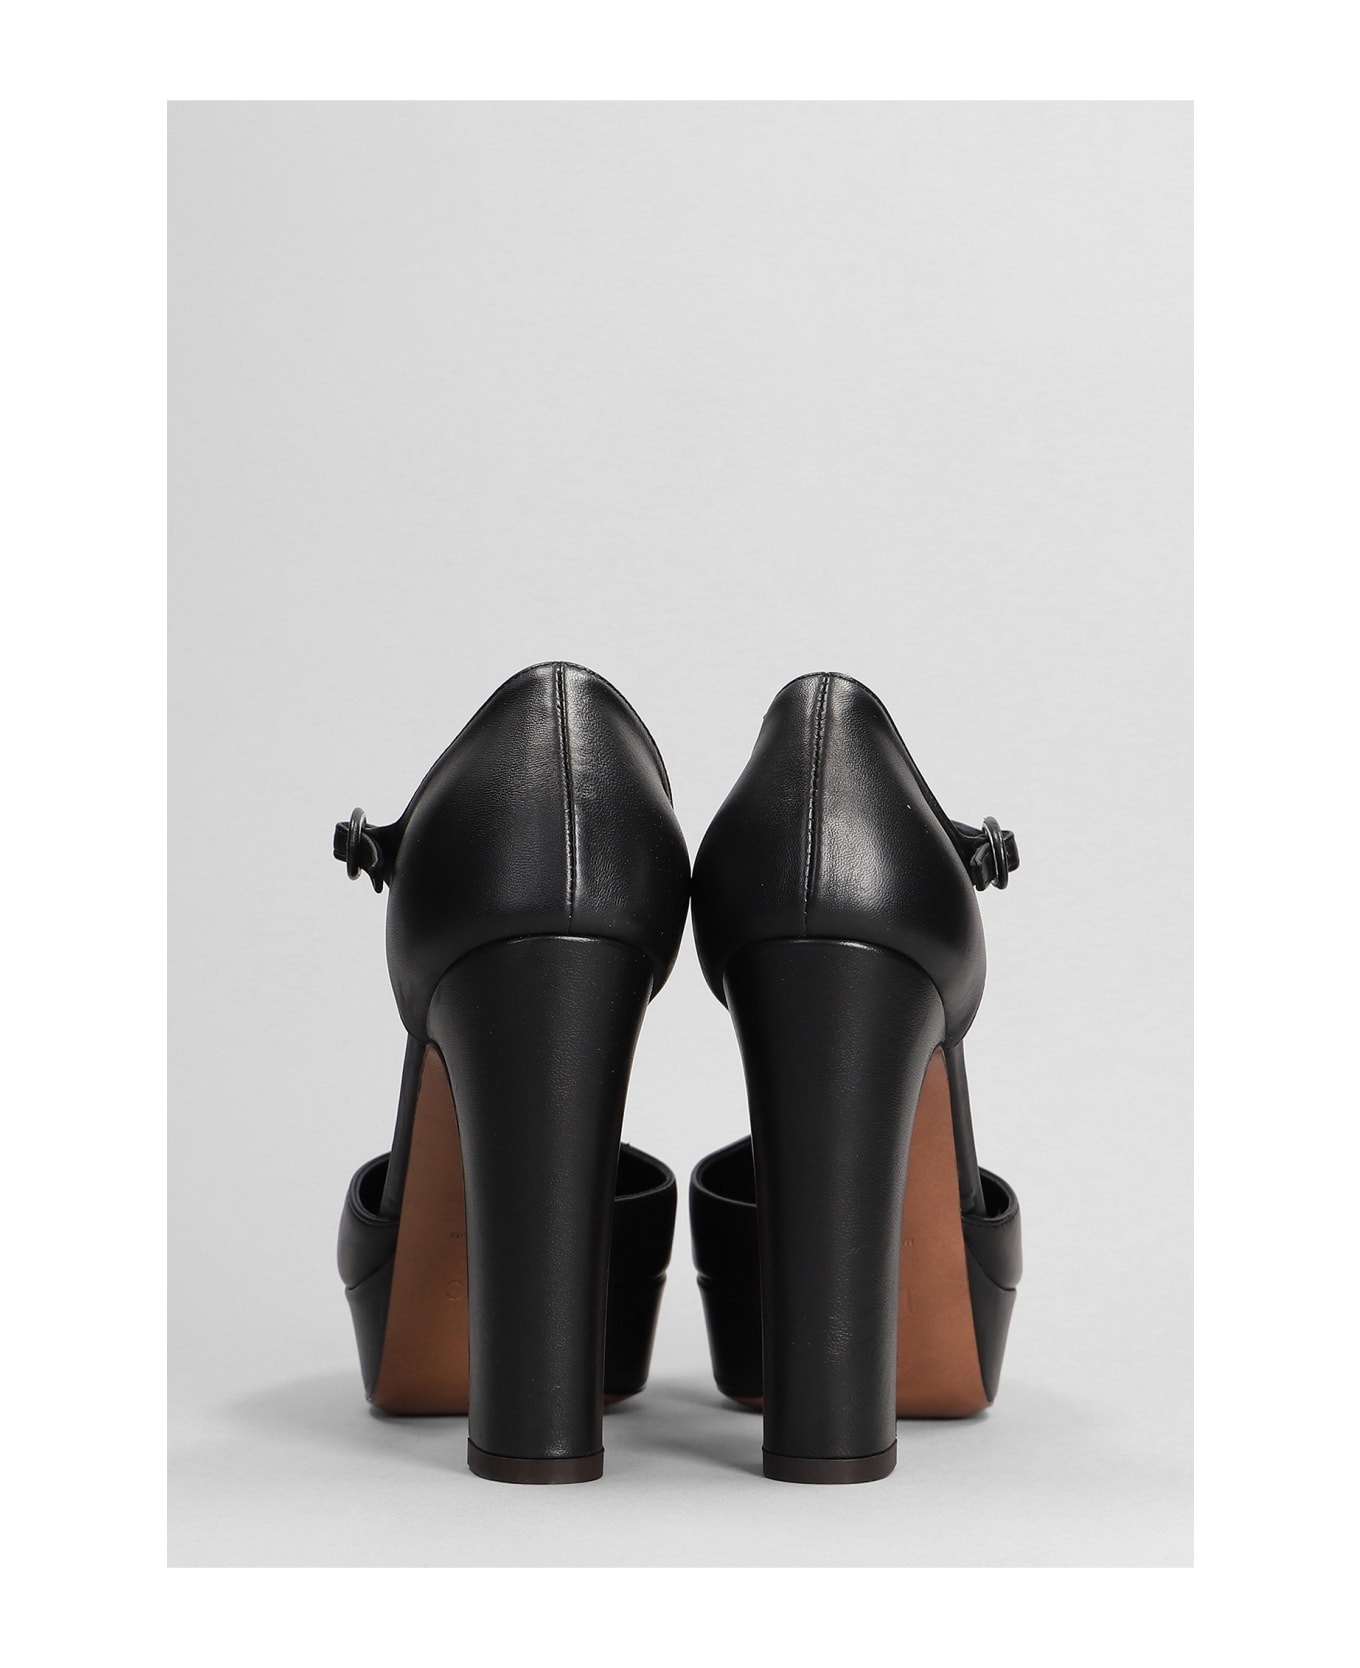 Relac Pumps In Black Leather - Antracite